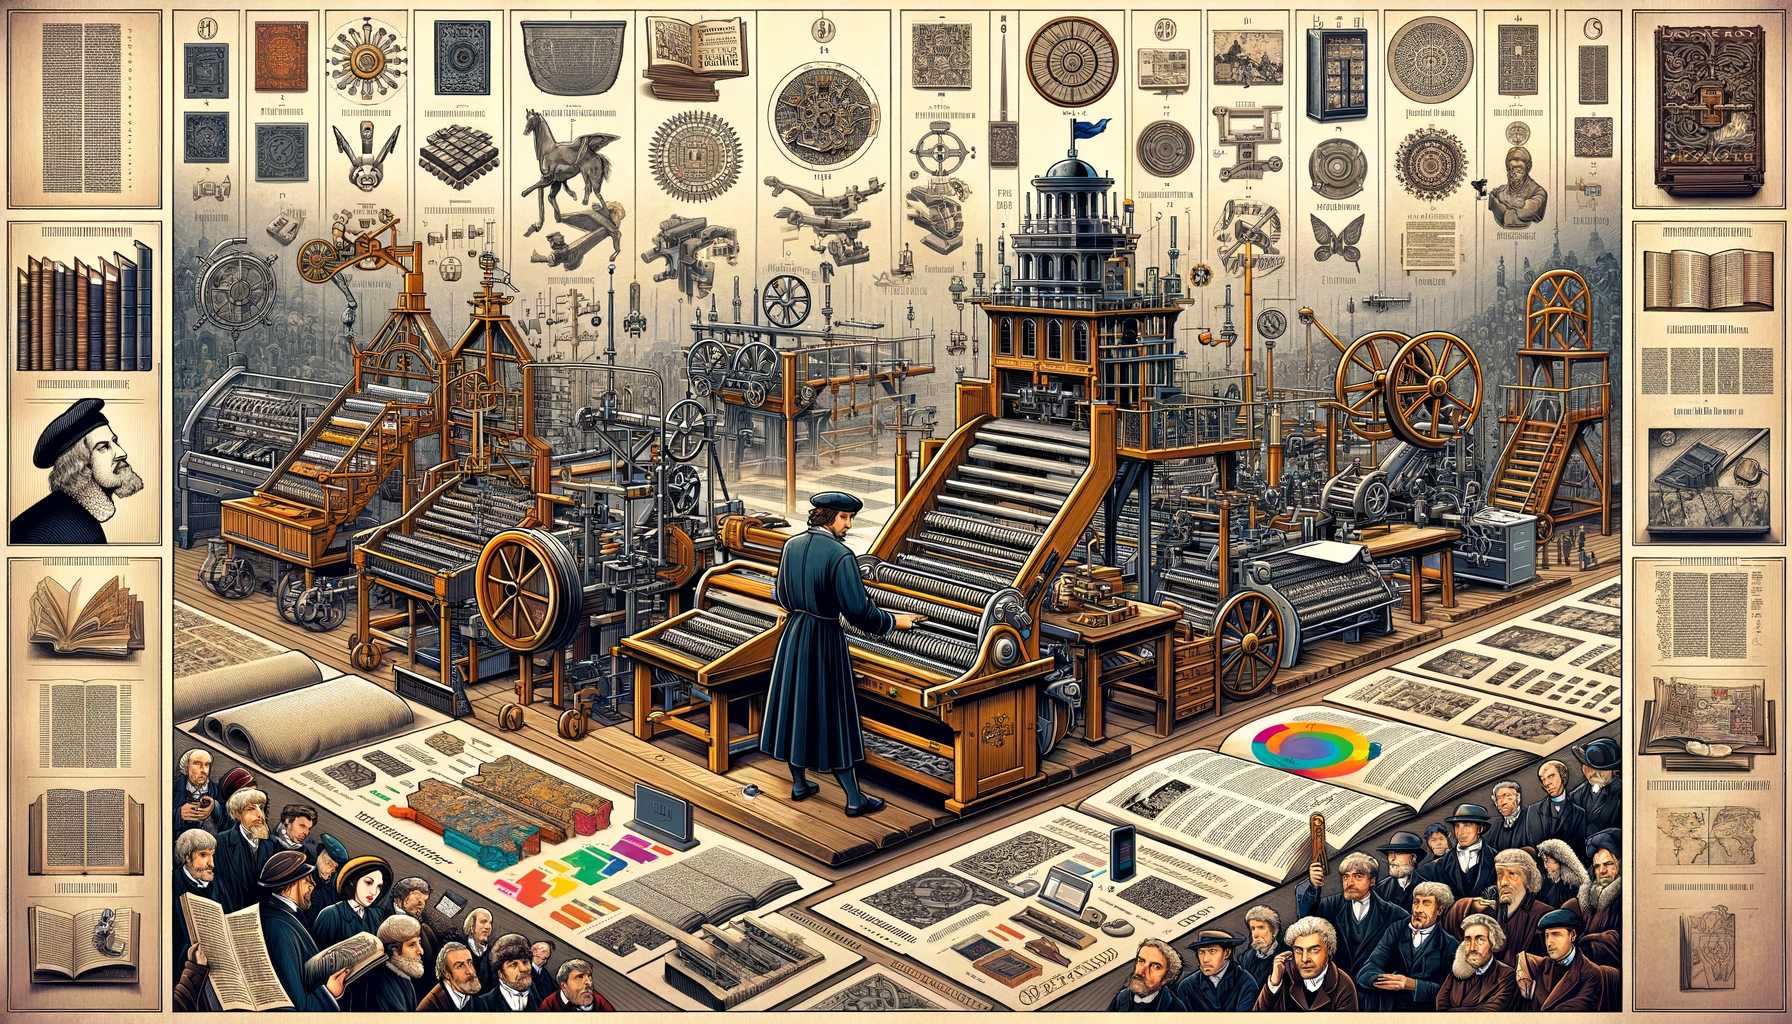 THE EVOLUTION OF THE PRINTING PRESS AND ITS IMPACT ON THE SPREAD OF KNOWLEDGE